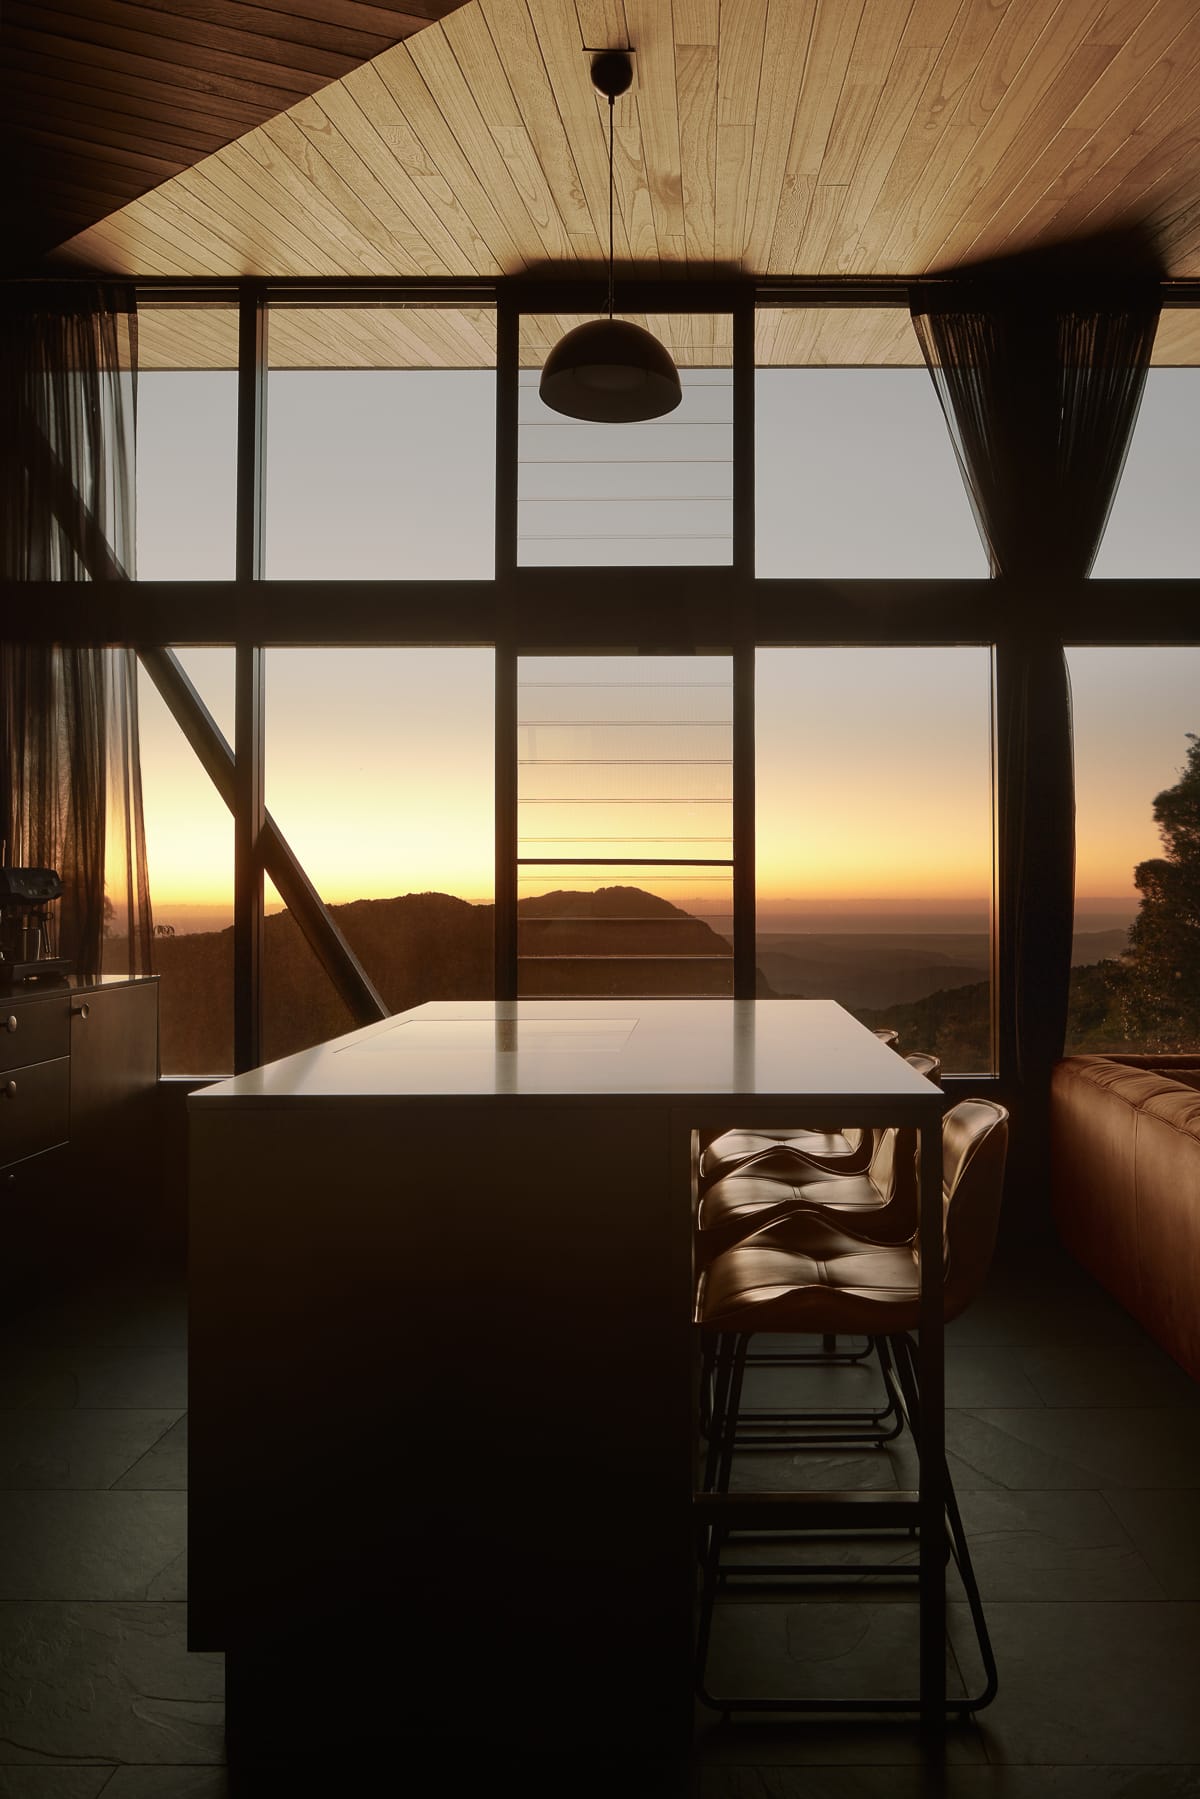 An interior shot of the kitchen showing the view at sunset making the interior of the cabin orange